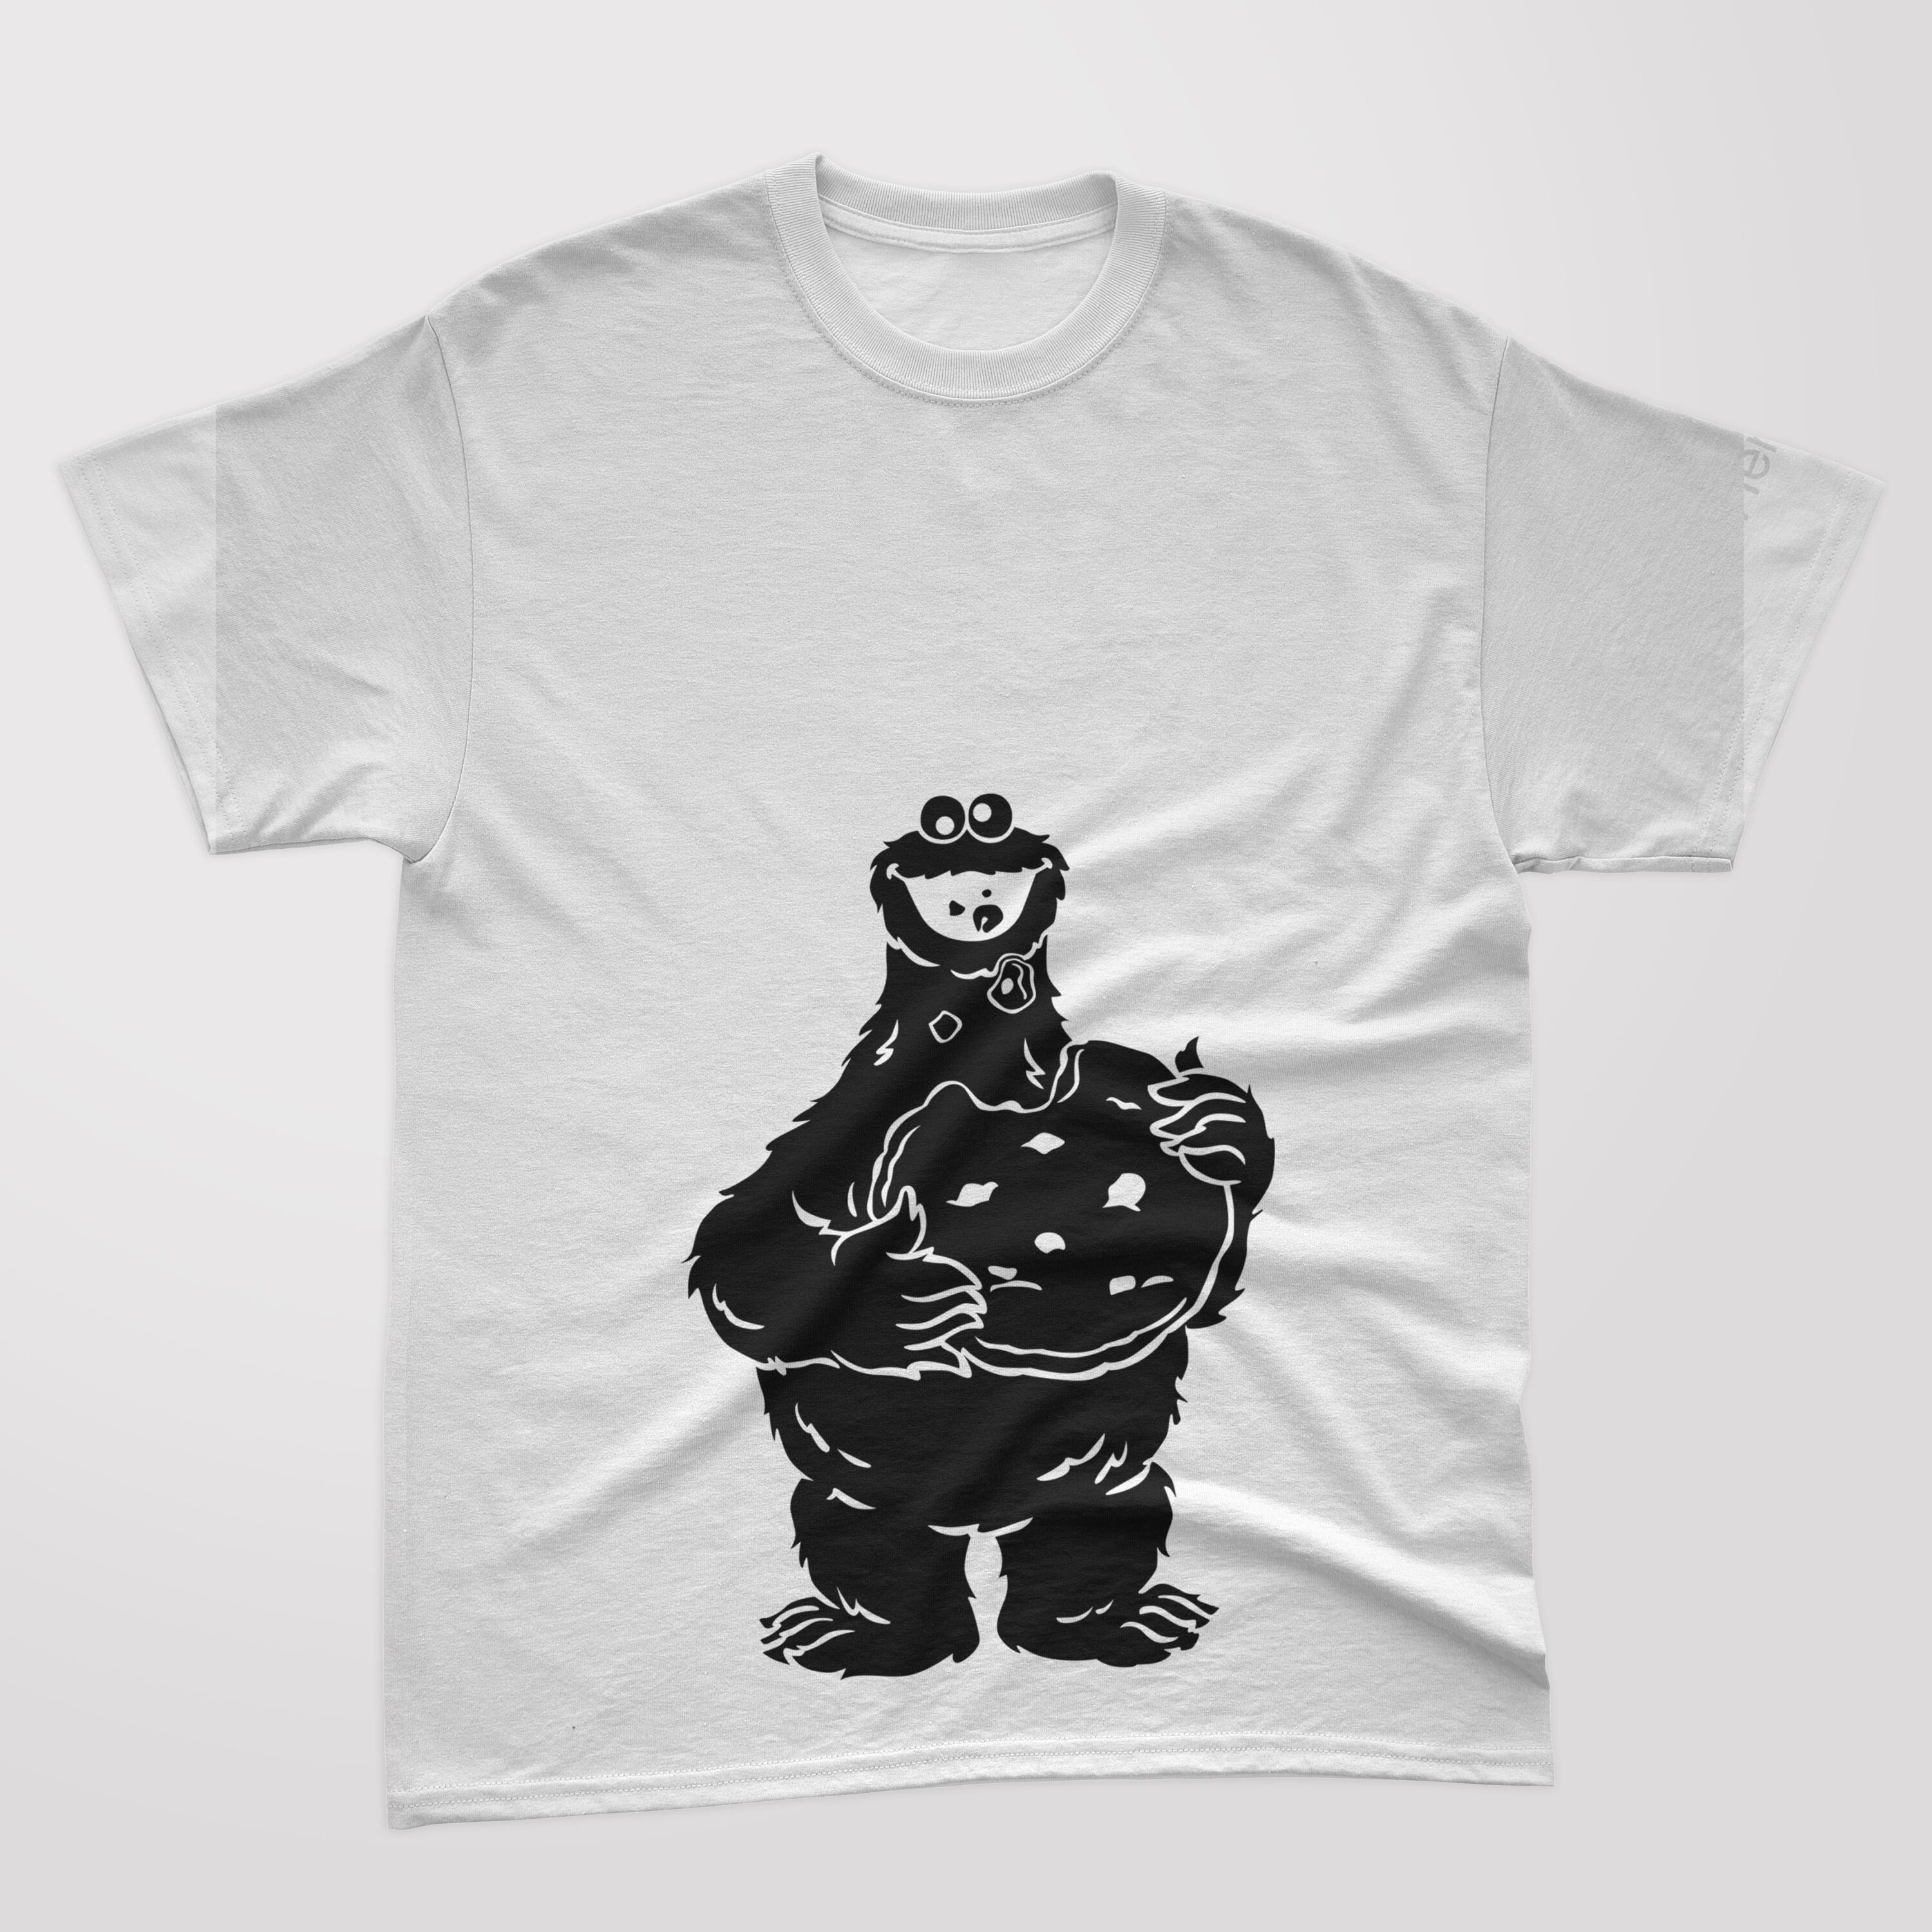 A white t-shirt with a black silhouette of a cookie monster that eats food.